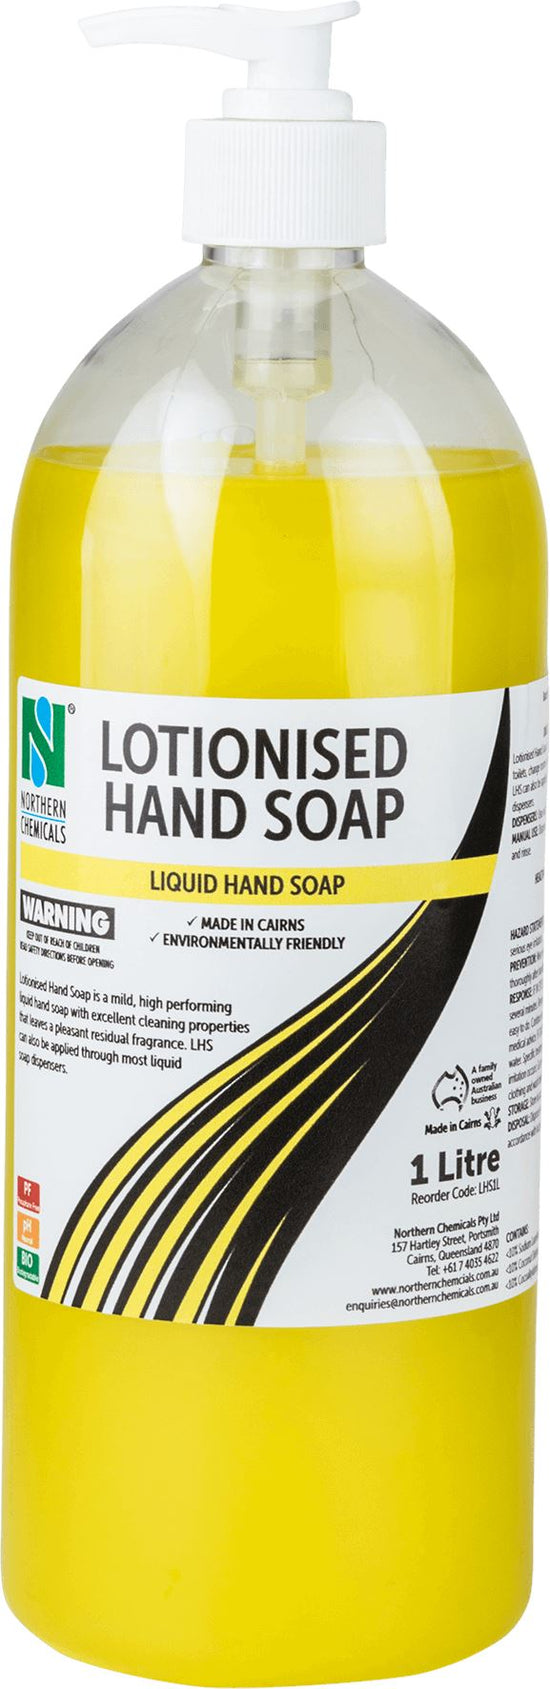 Lotionised Hand Soap Hand Soap Northern Chemicals 1L  (6687945457835)